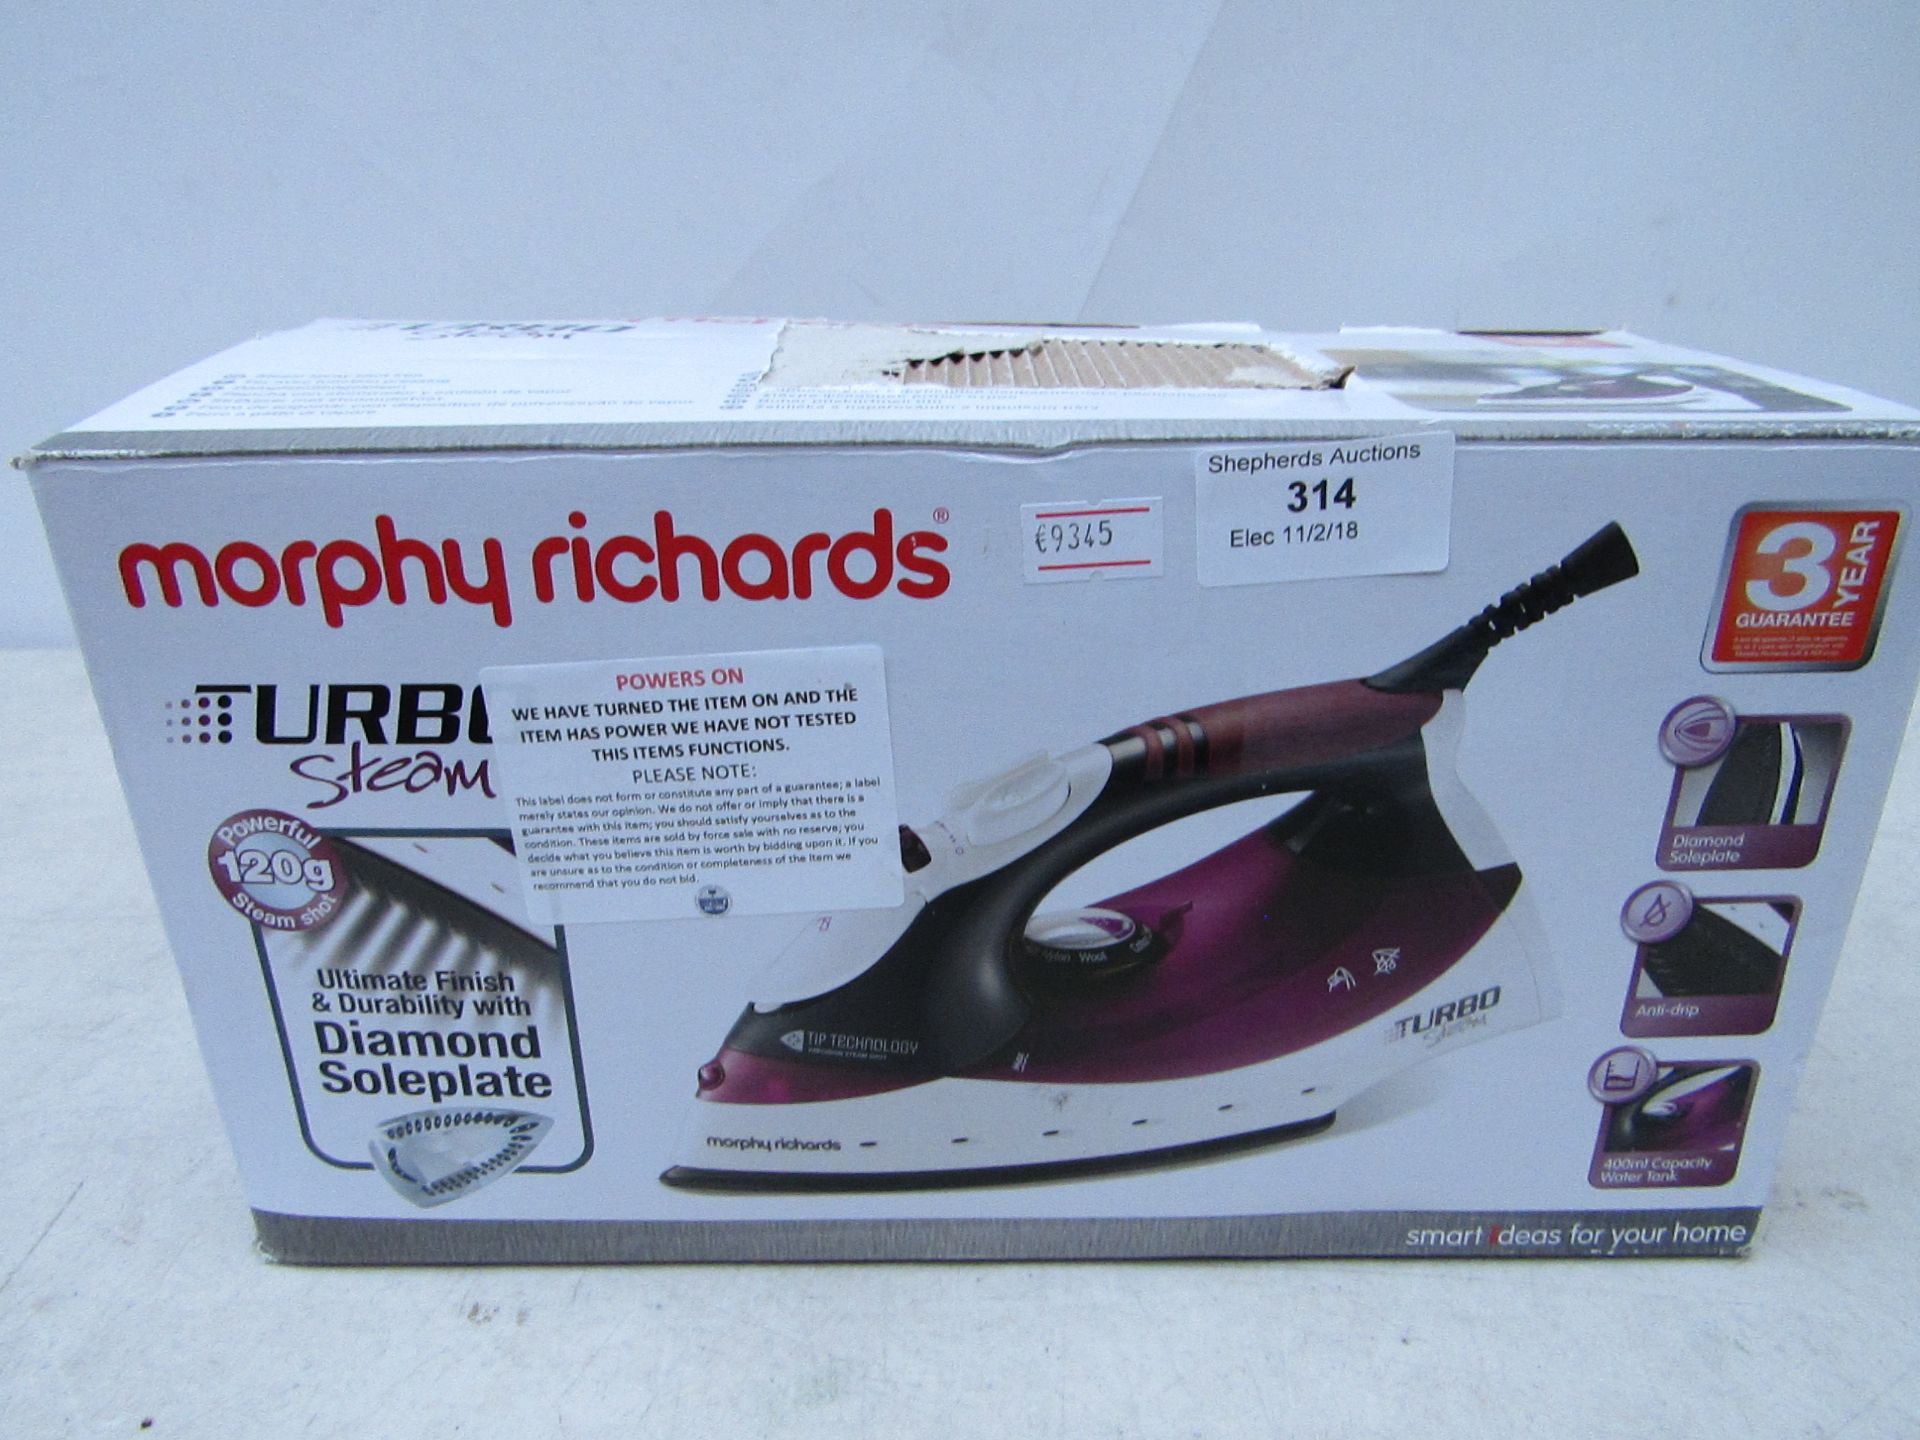 Morphy Richards urbo steam spray shot iron. Powers on & boxed.